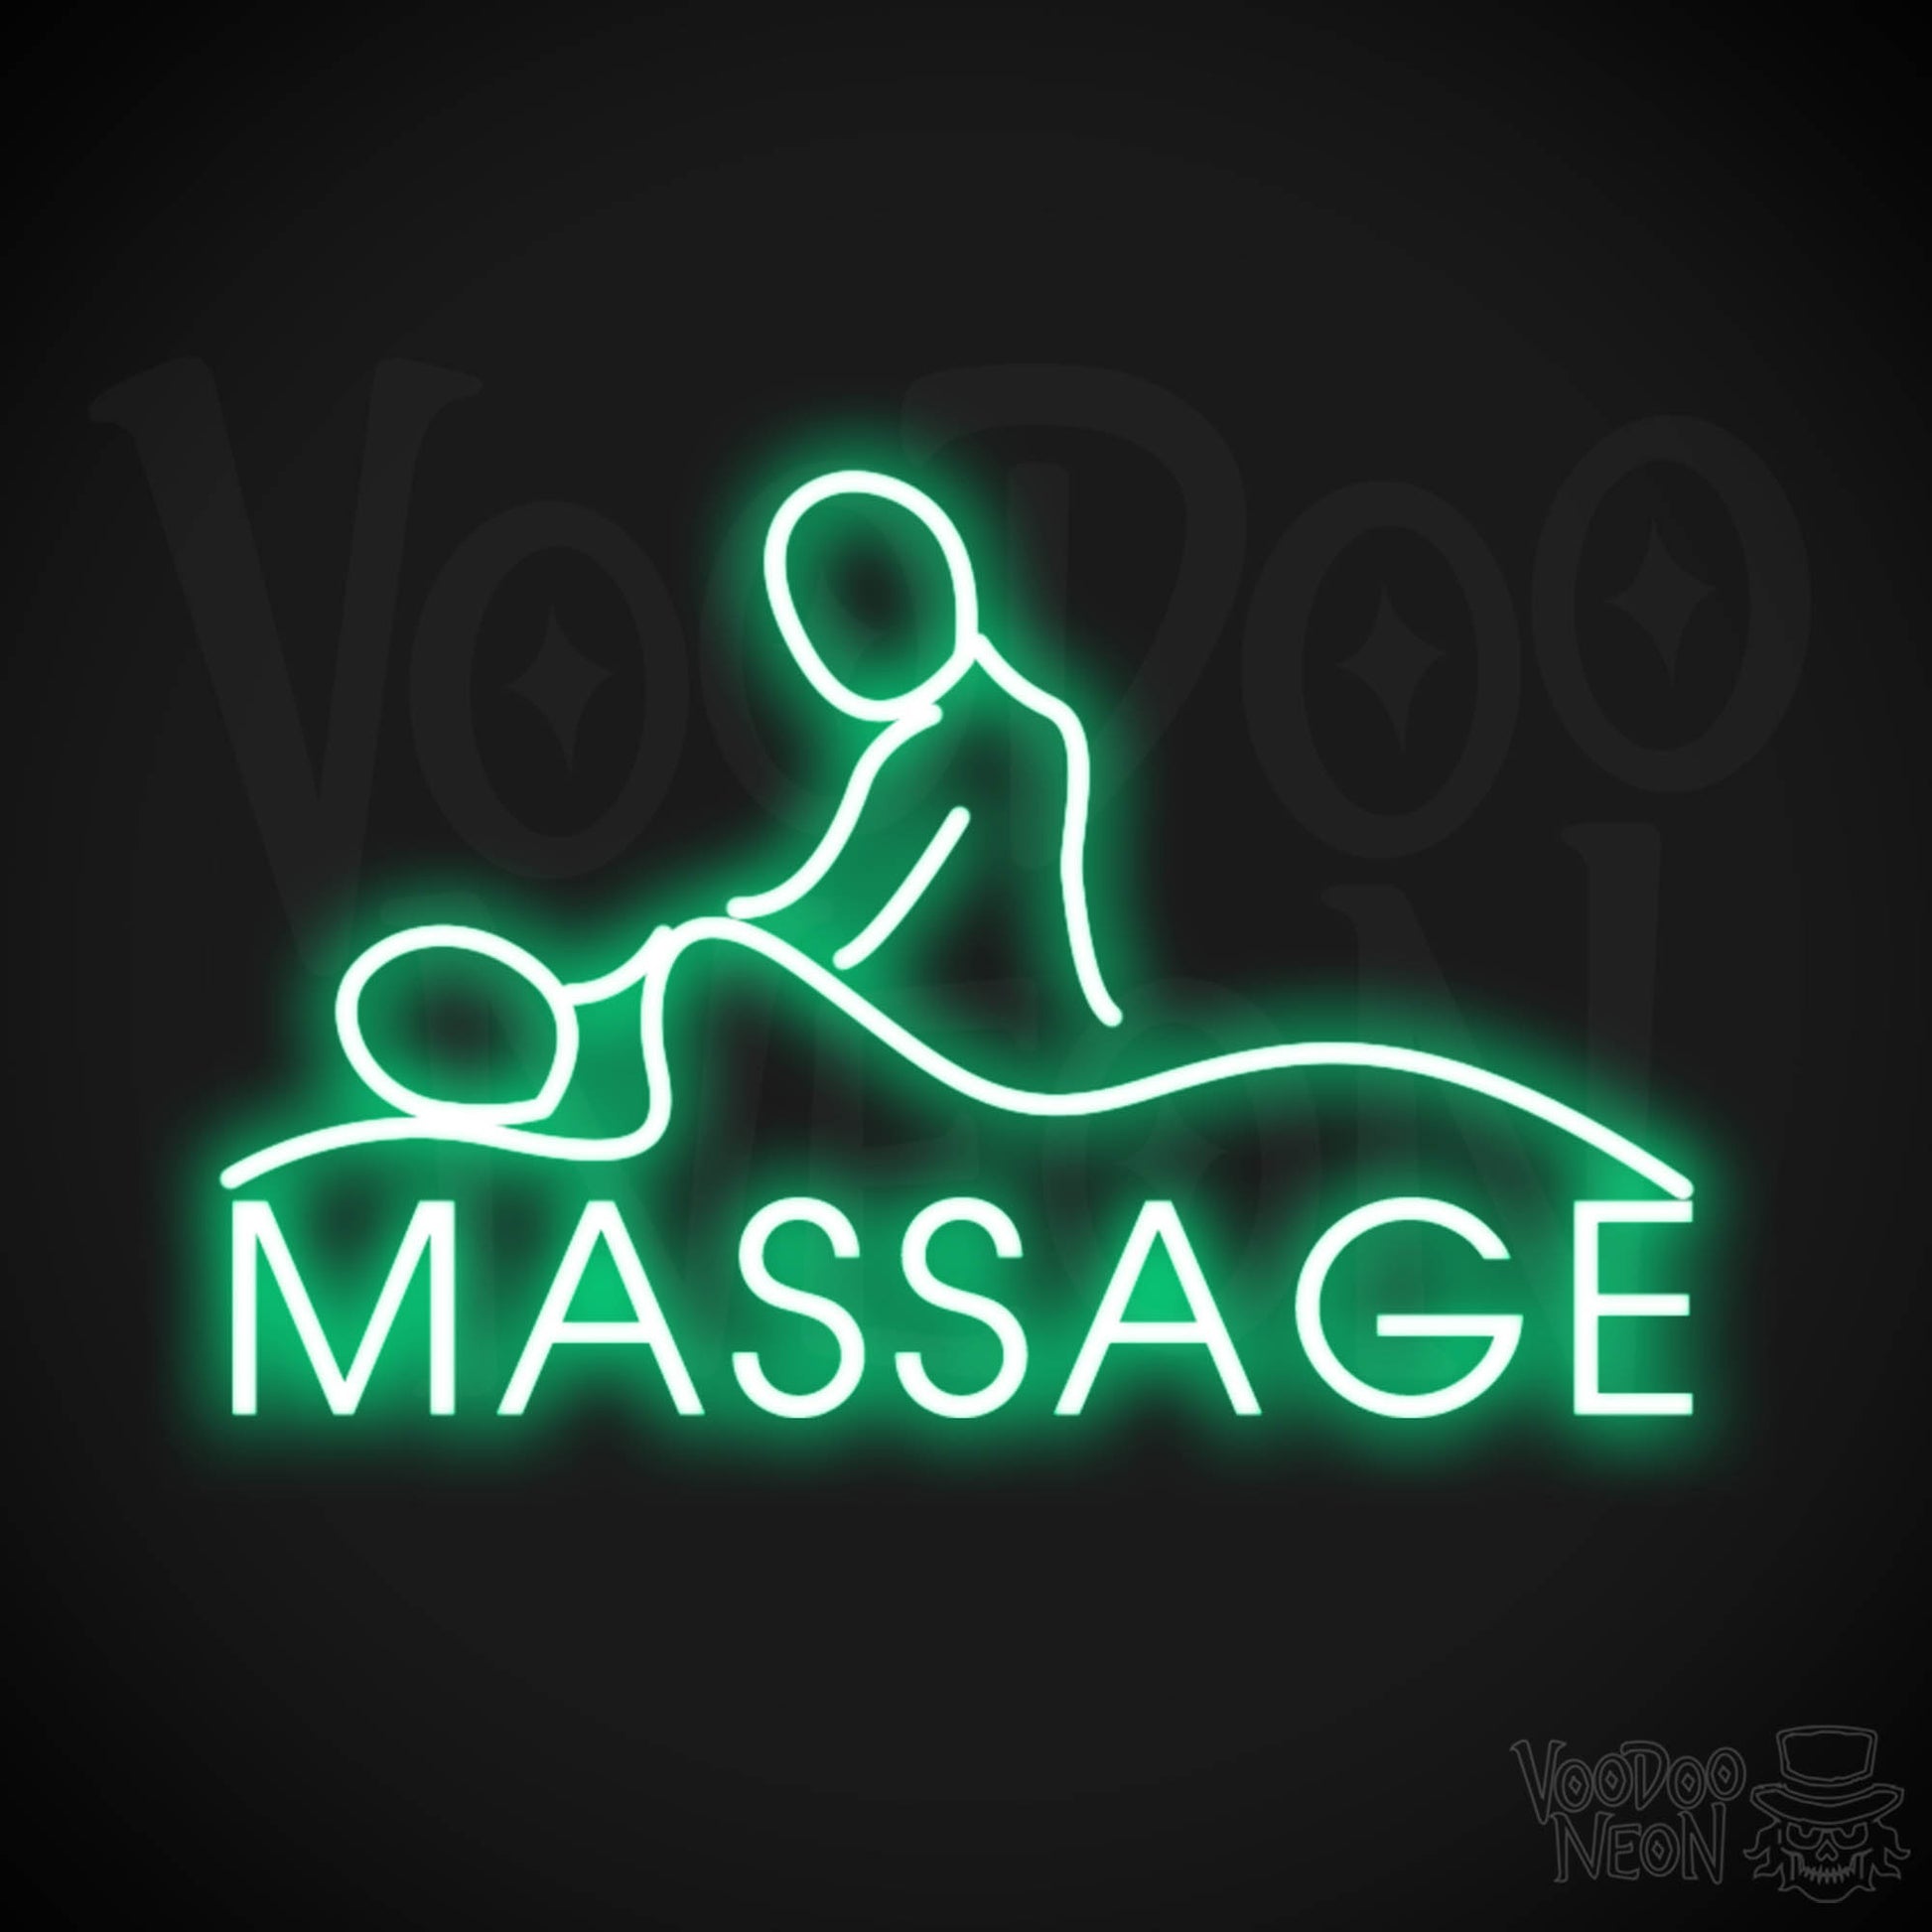 Massage Neon Sign - Neon Massage Sign - Massage Light Up Sign - Color Green